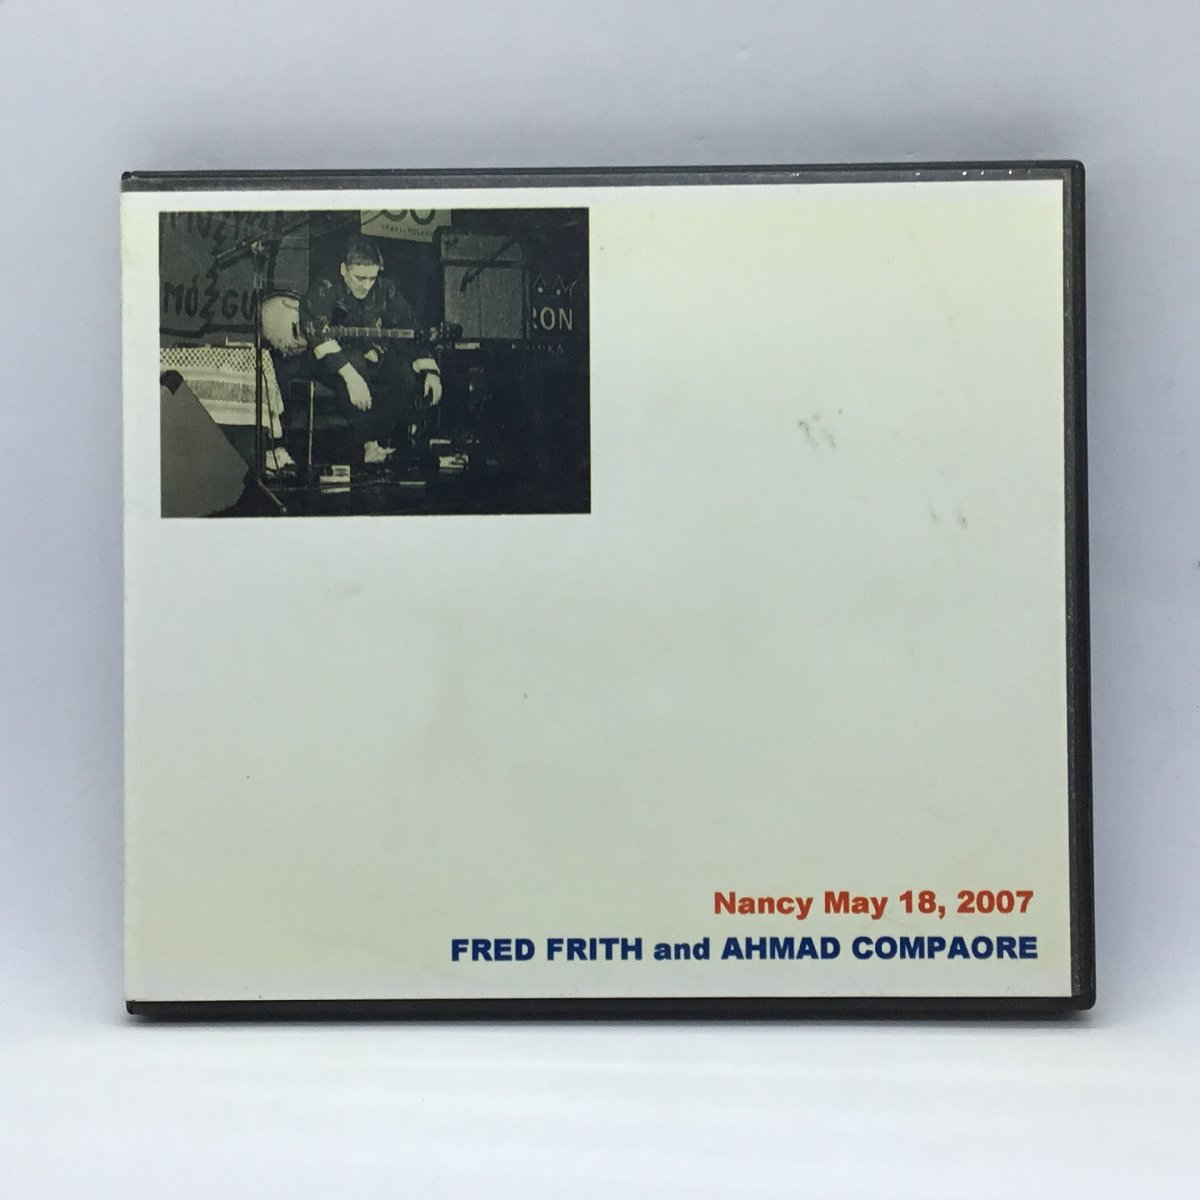 CD-R ◇ FRED FRITH and AHMAD COMPAORE Nancy May 18, 2007 (CD-R) BLUE 035　フレッド・フリス_画像1